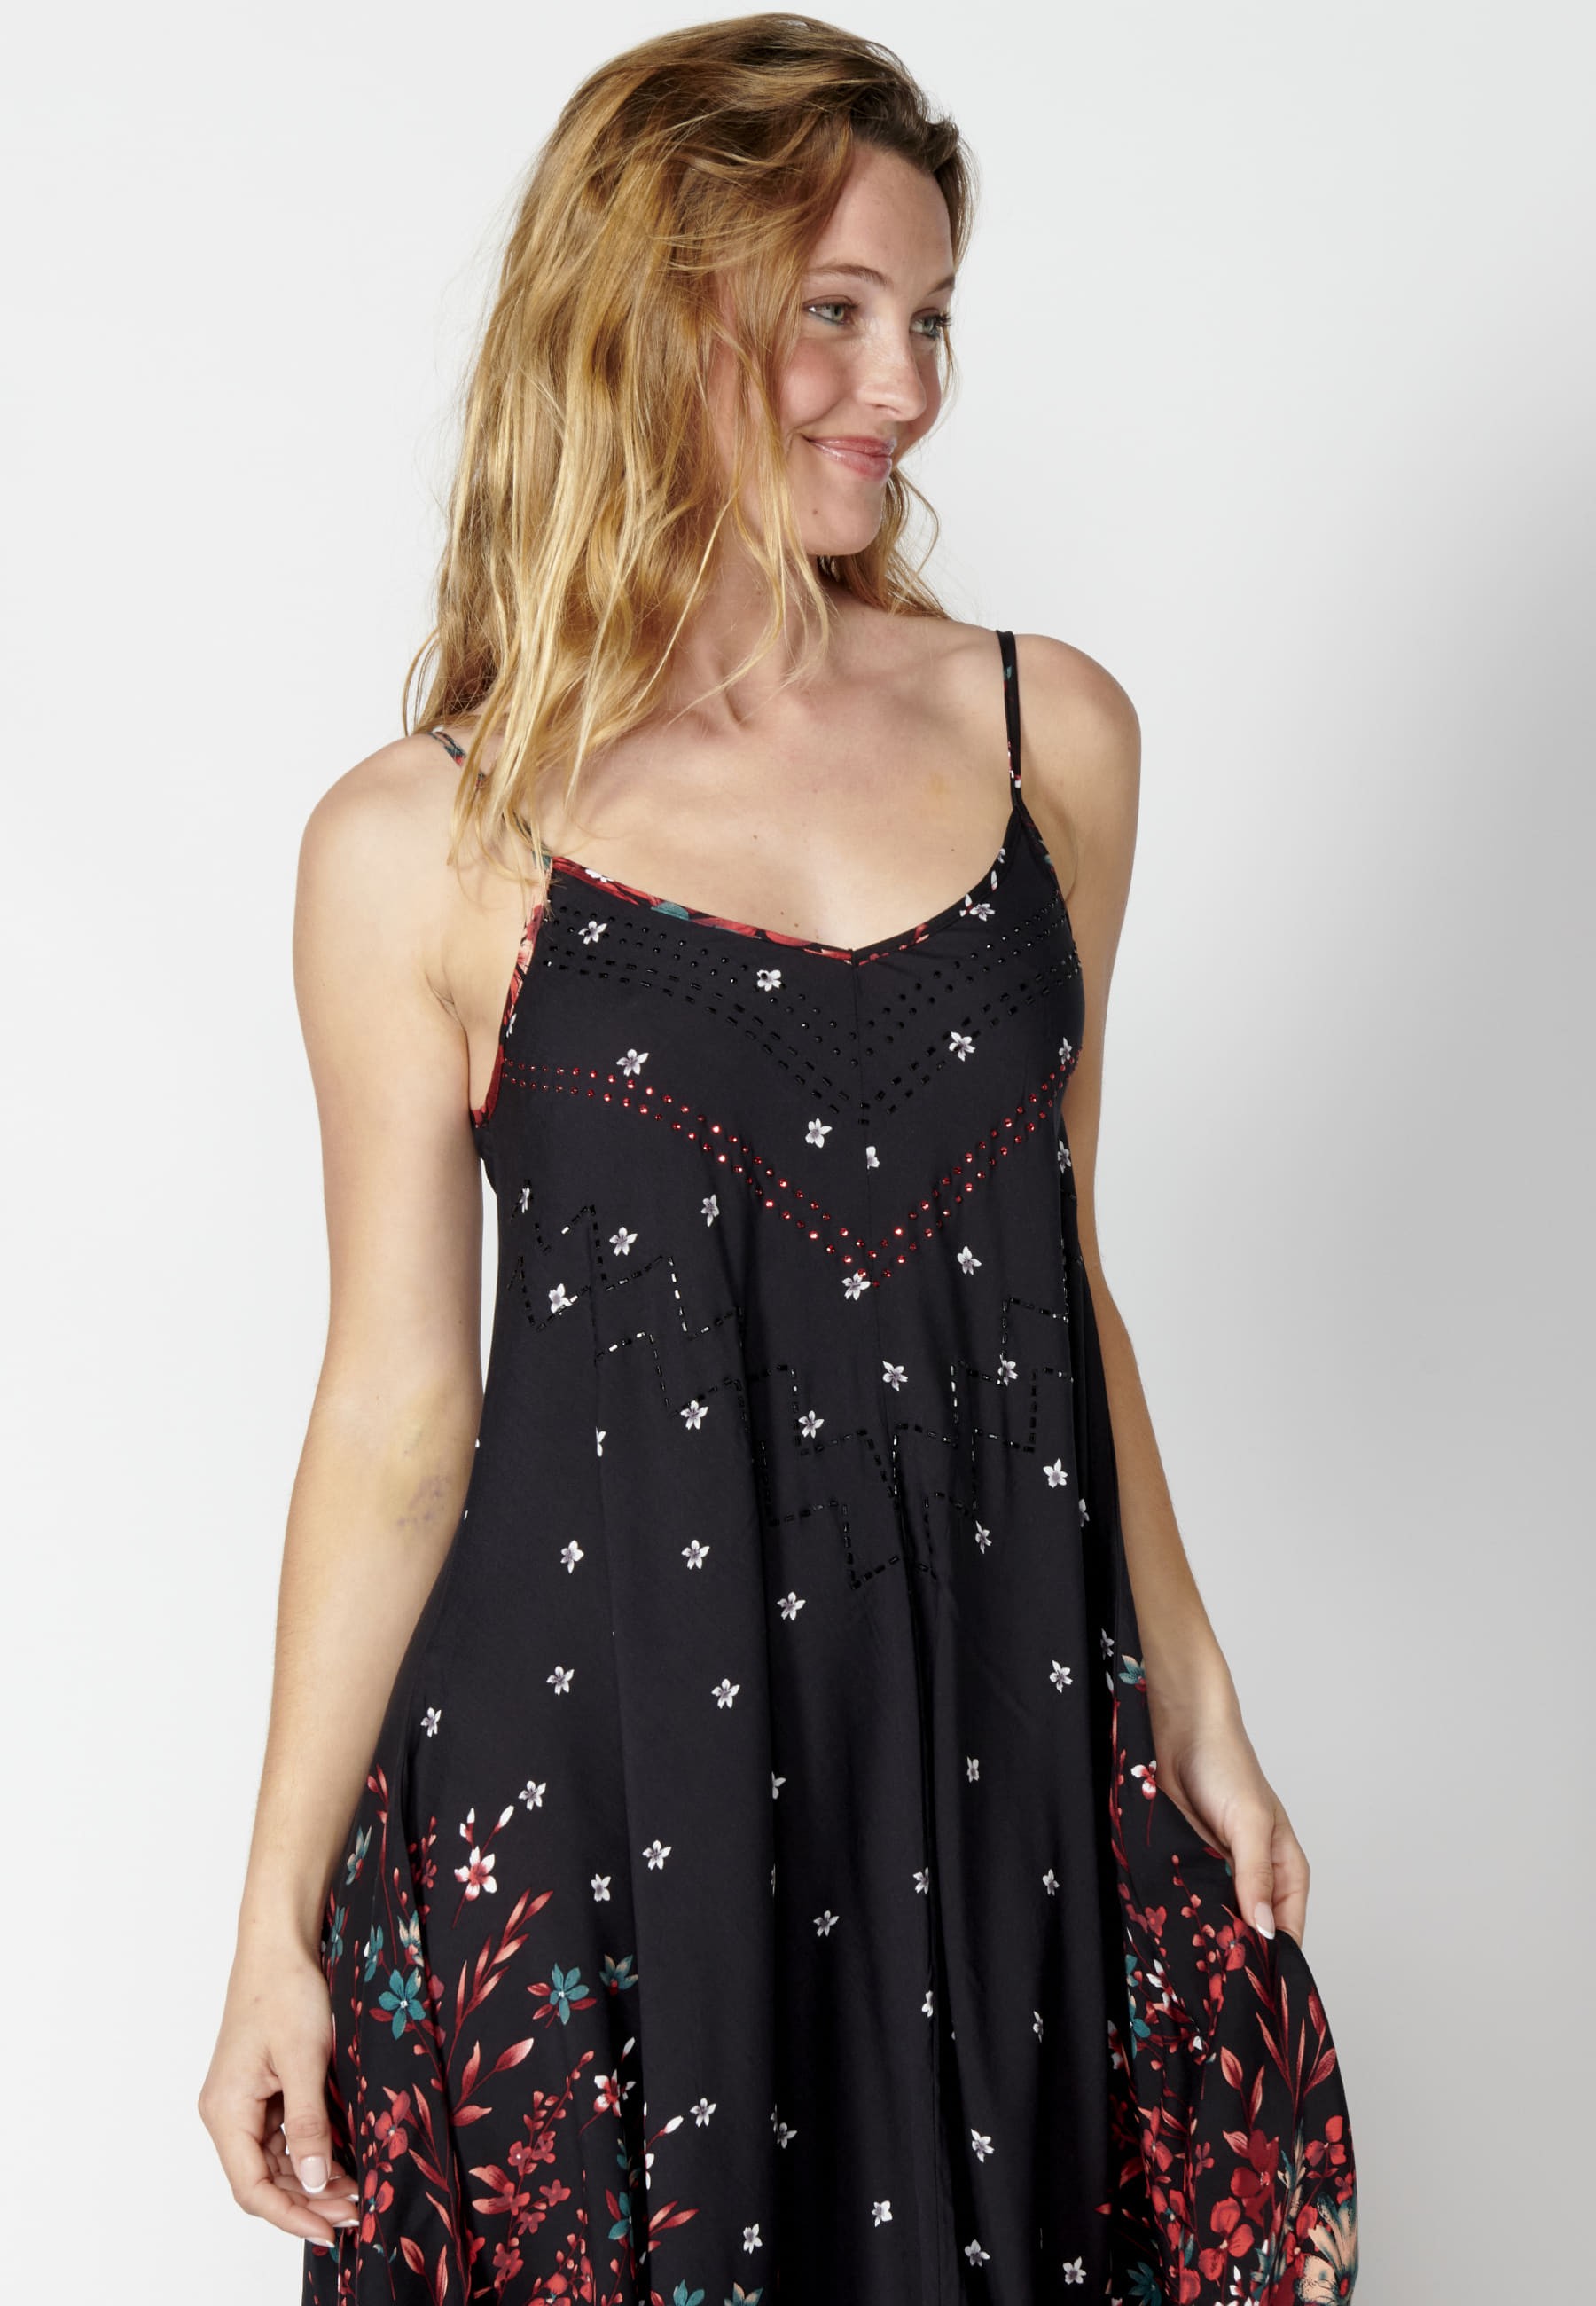 Loose long strappy dress with black floral print for Women